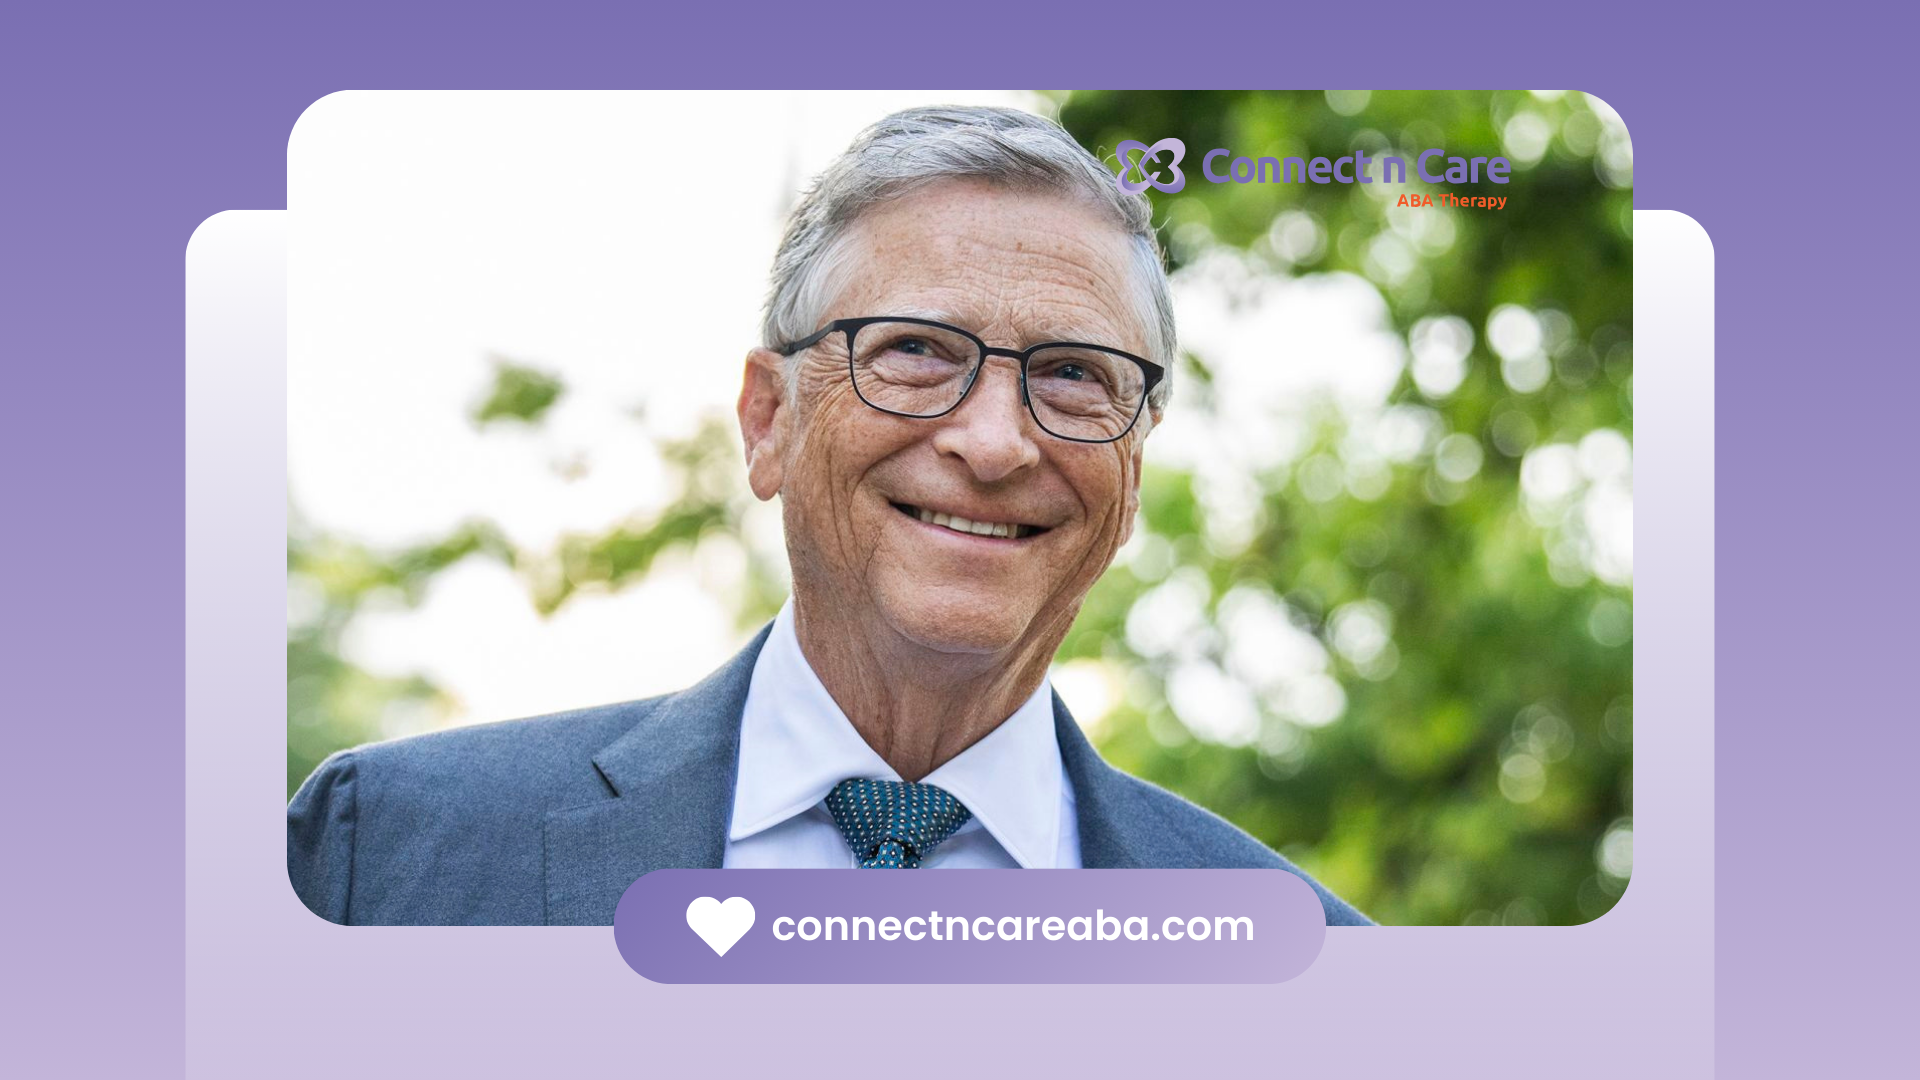 Bill Gates, Microsoft founder, speculated with autism, smiling in a suit and glasses outdoors.